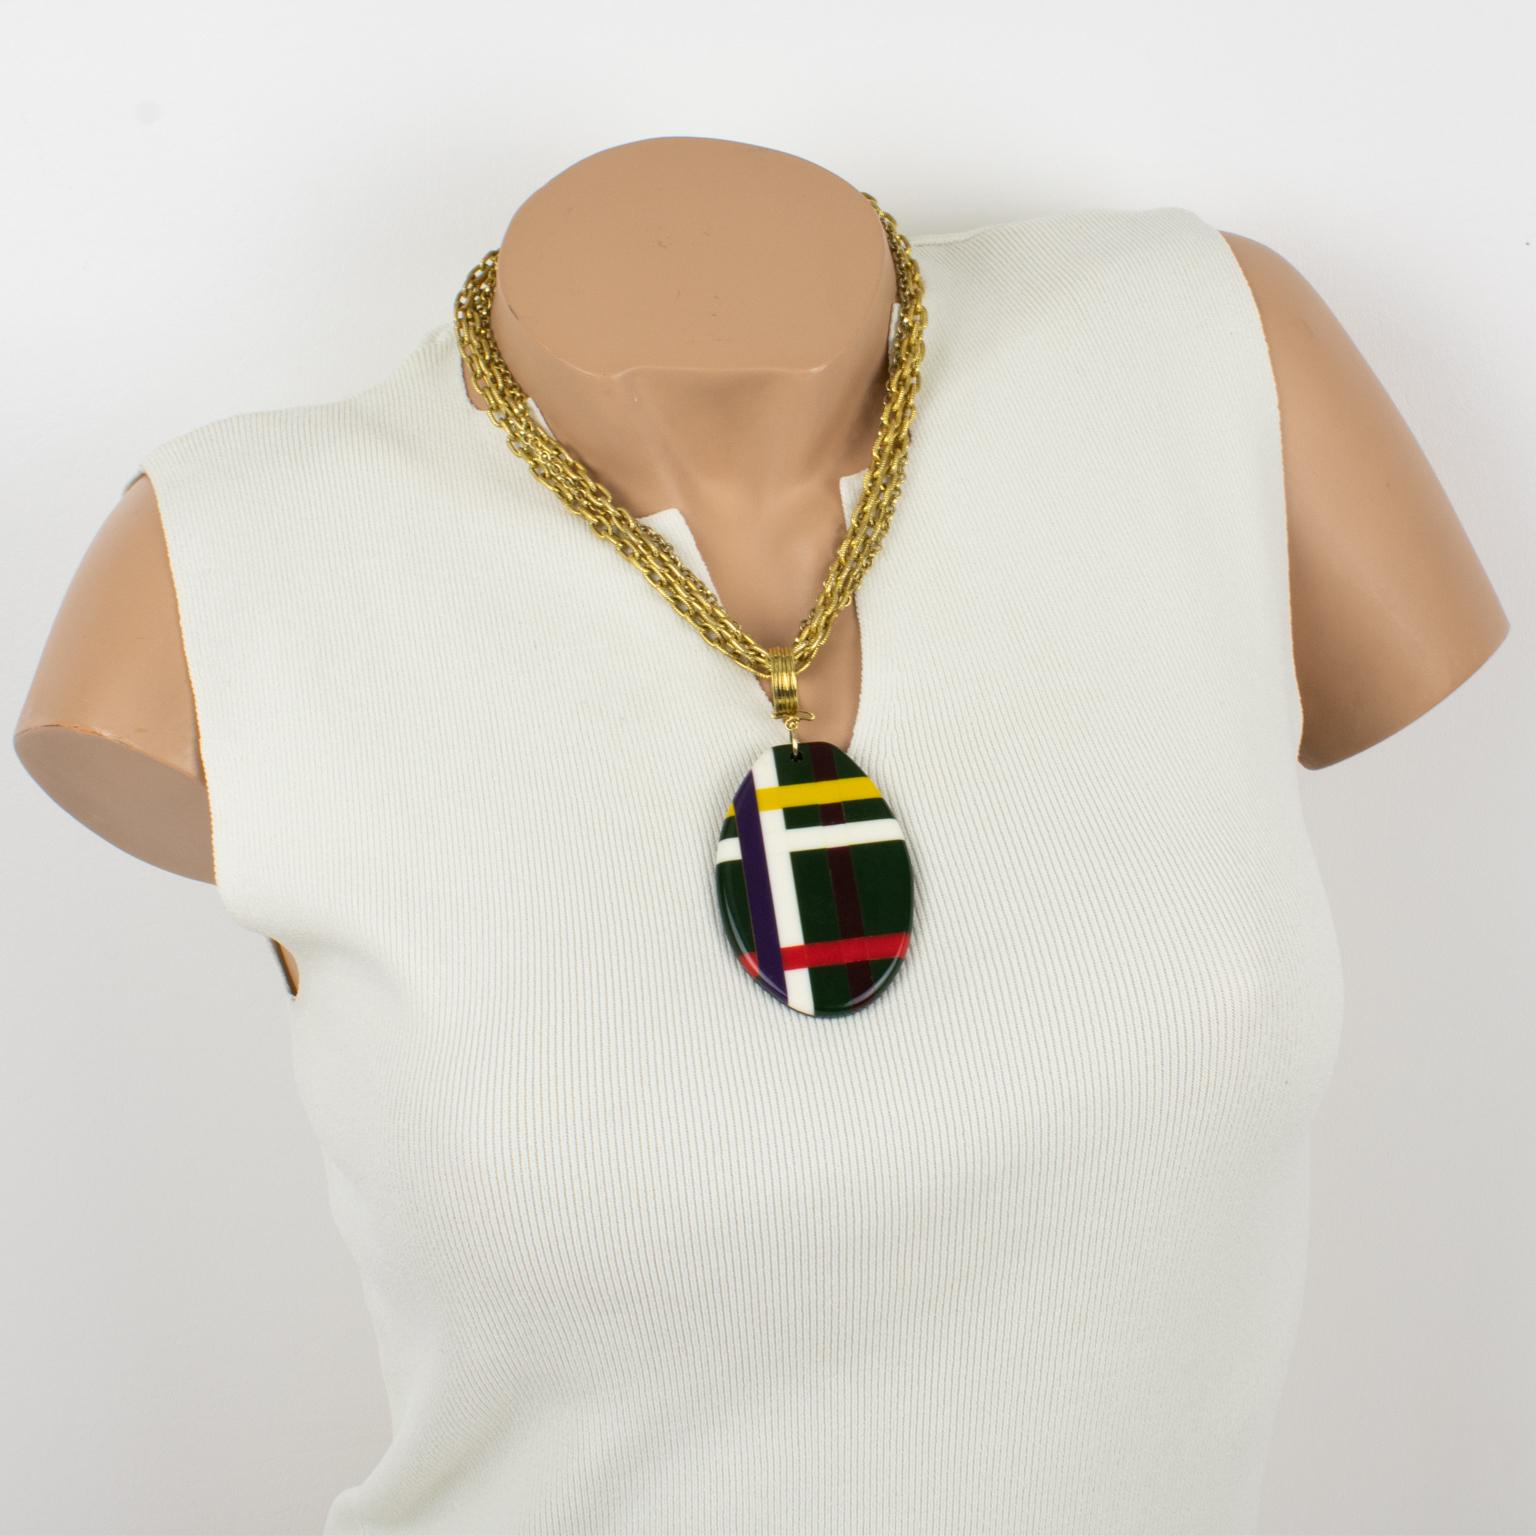 This gorgeous Donatella Pellini Italy choker necklace features a modernist design. The gilded metal multi-chain choker shape is ornate with a massive oval pendant with Memphis style flair and has a lobster closing clasp with a small chain for length